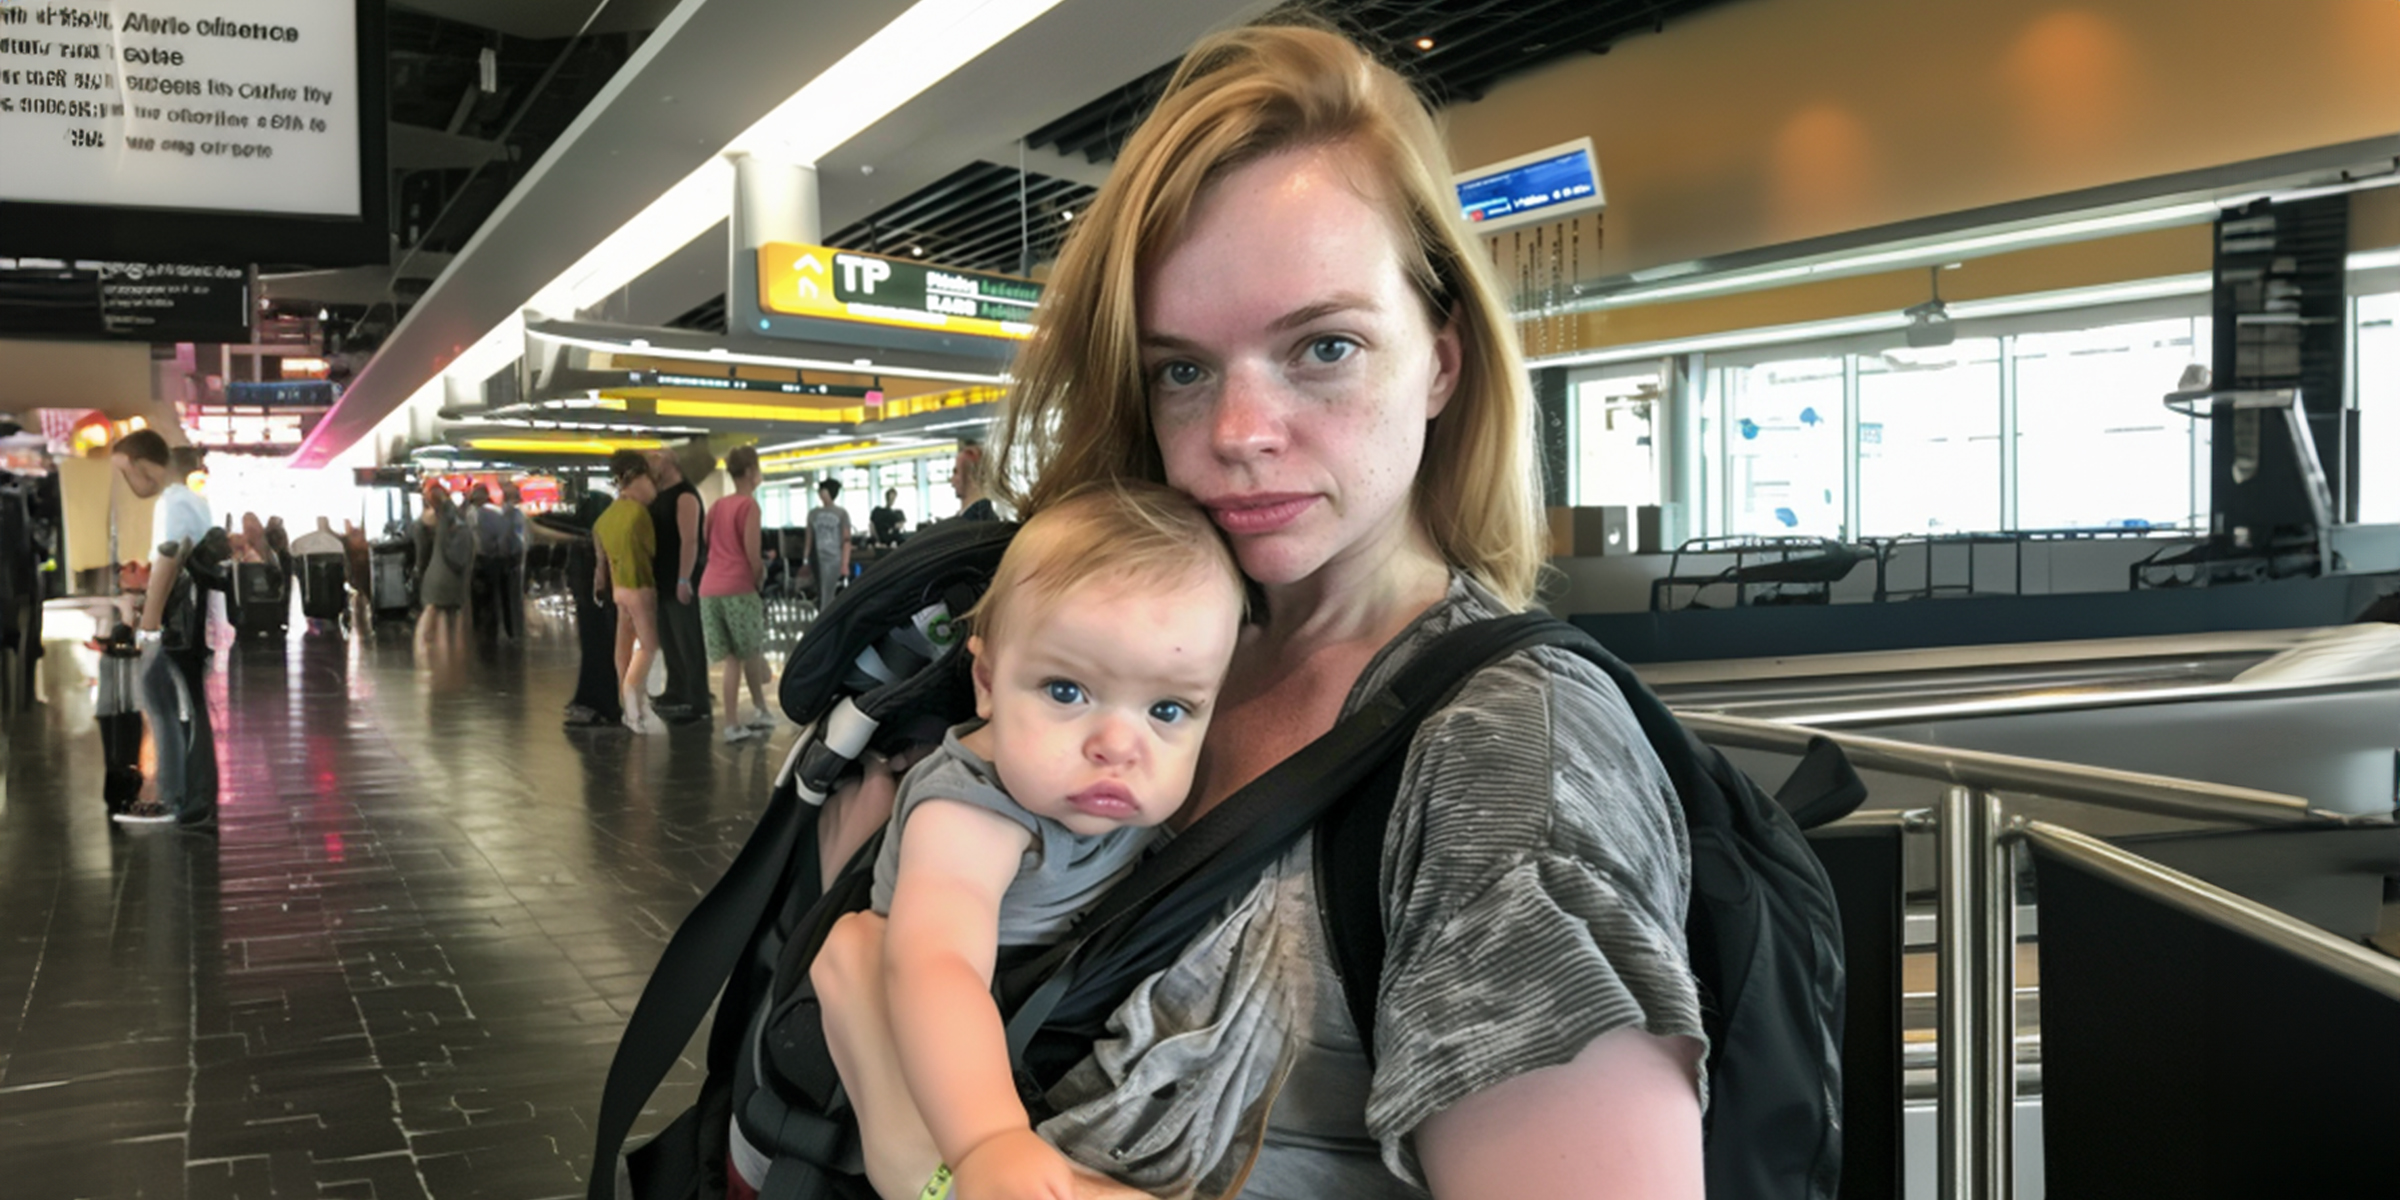 A woman holding a baby in an airport terminal | Source: Amomama